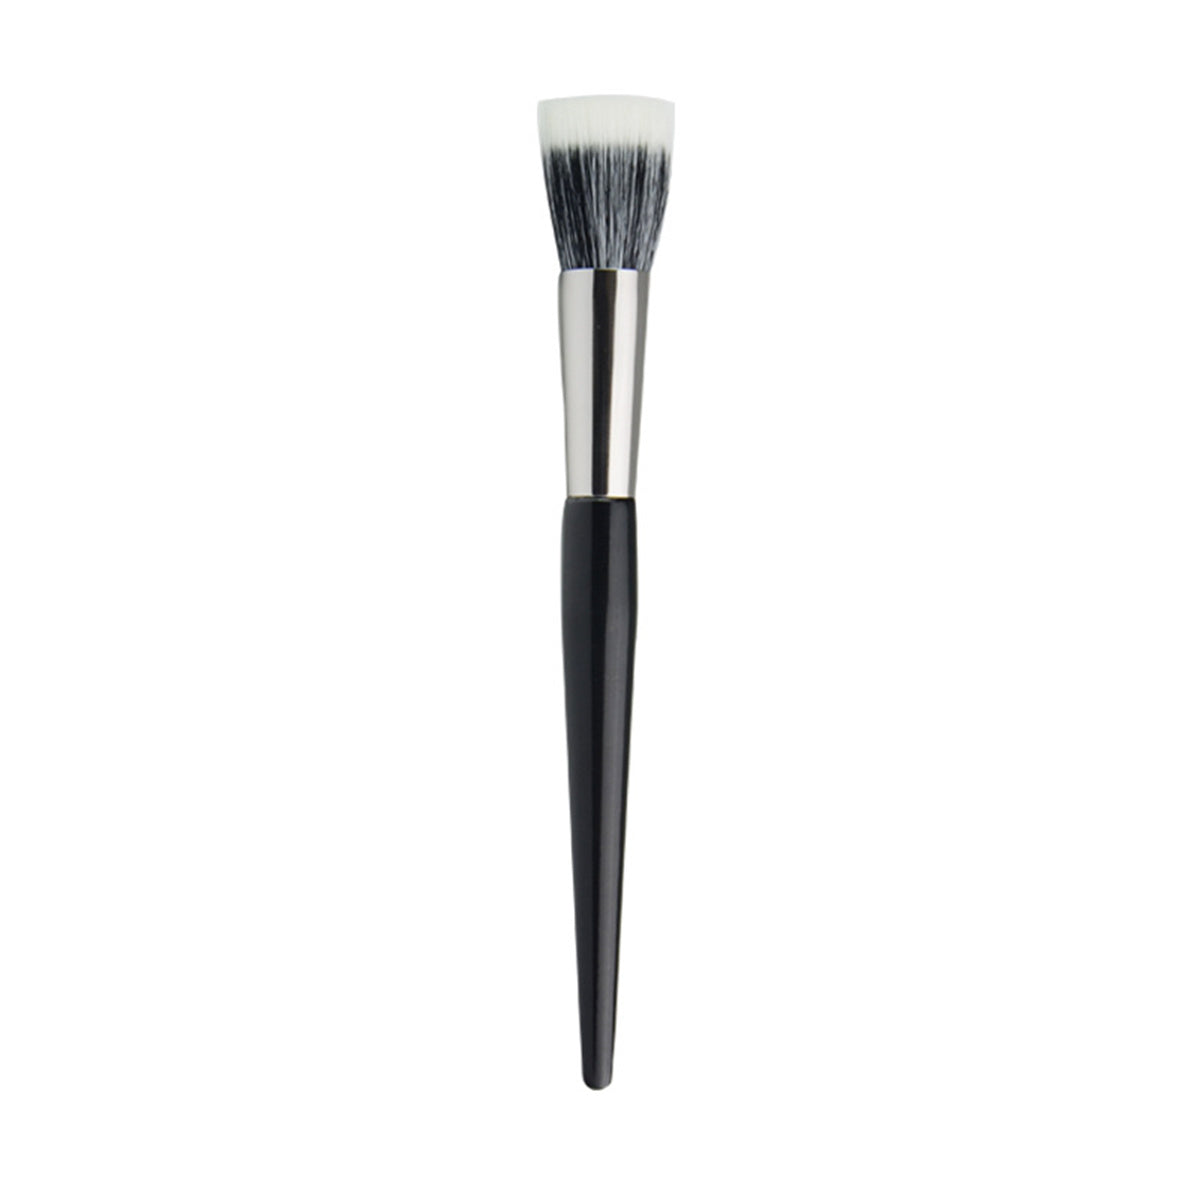 Flat Top  Foundation Brush Premium Stippling Makeup Perfect for Cheek Nose Contouring Stippling Blending- Quality Synthetic Dense Bristles